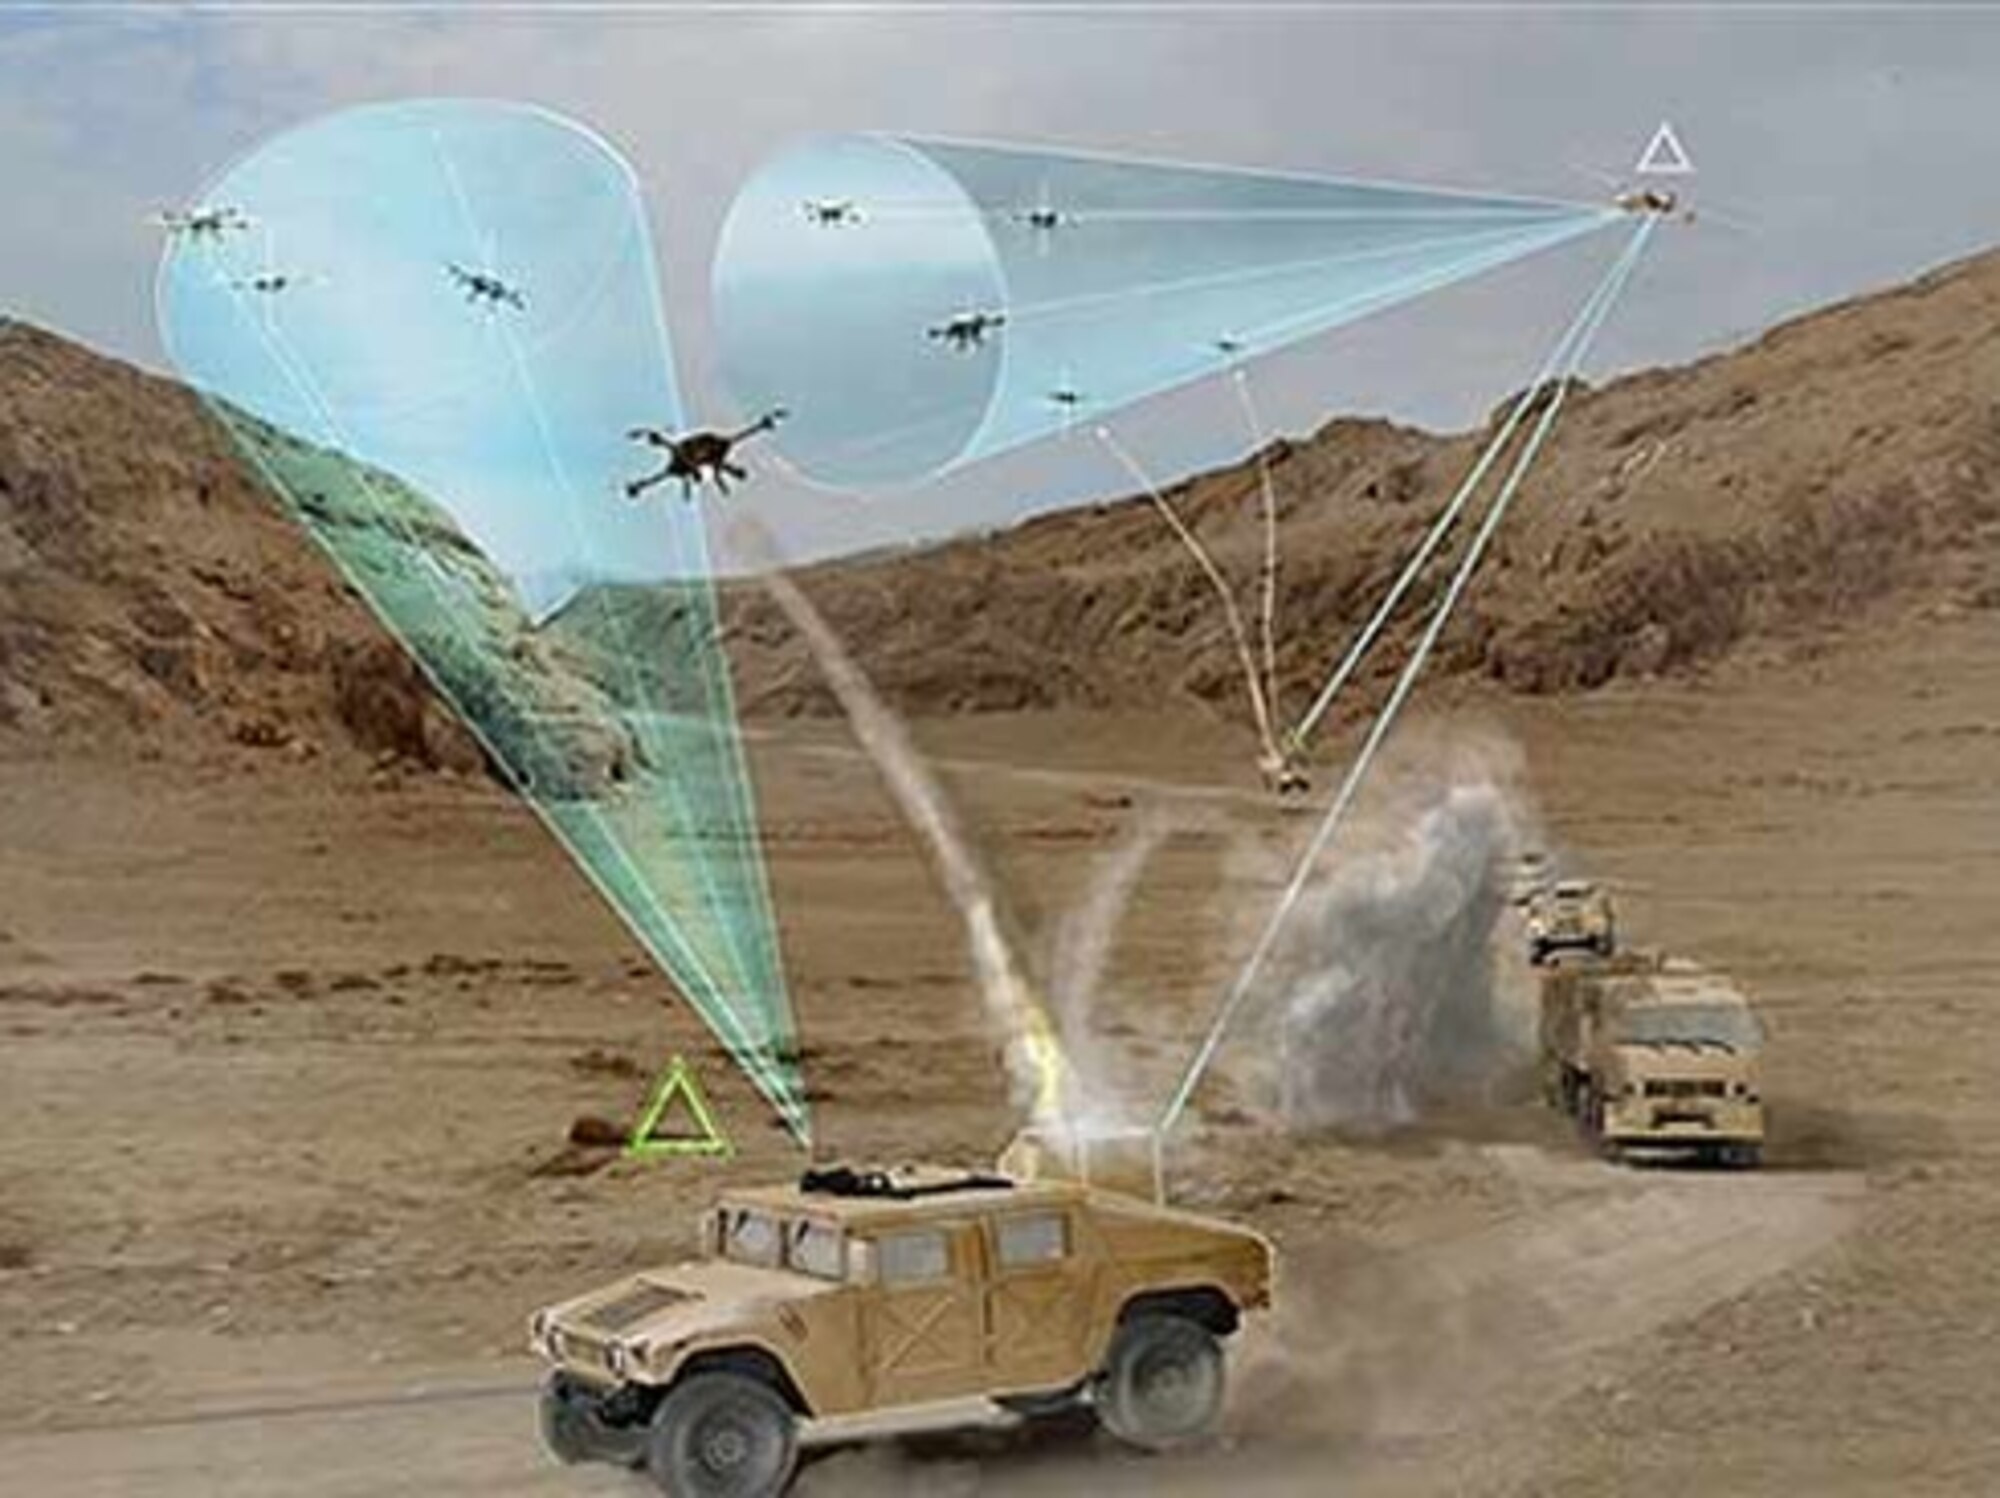 OSI PF Detachment 3 Area of Responsibility contains an engineering breakthrough. The Air Force Research Laboratory at Kirtland Air Force Base, N.M., developed THOR, the Tactical High Power Operational Responder. THOR is a first of its kind electromagnetic weapon system capable of disabling enemy drones. (Courtesy graphic)